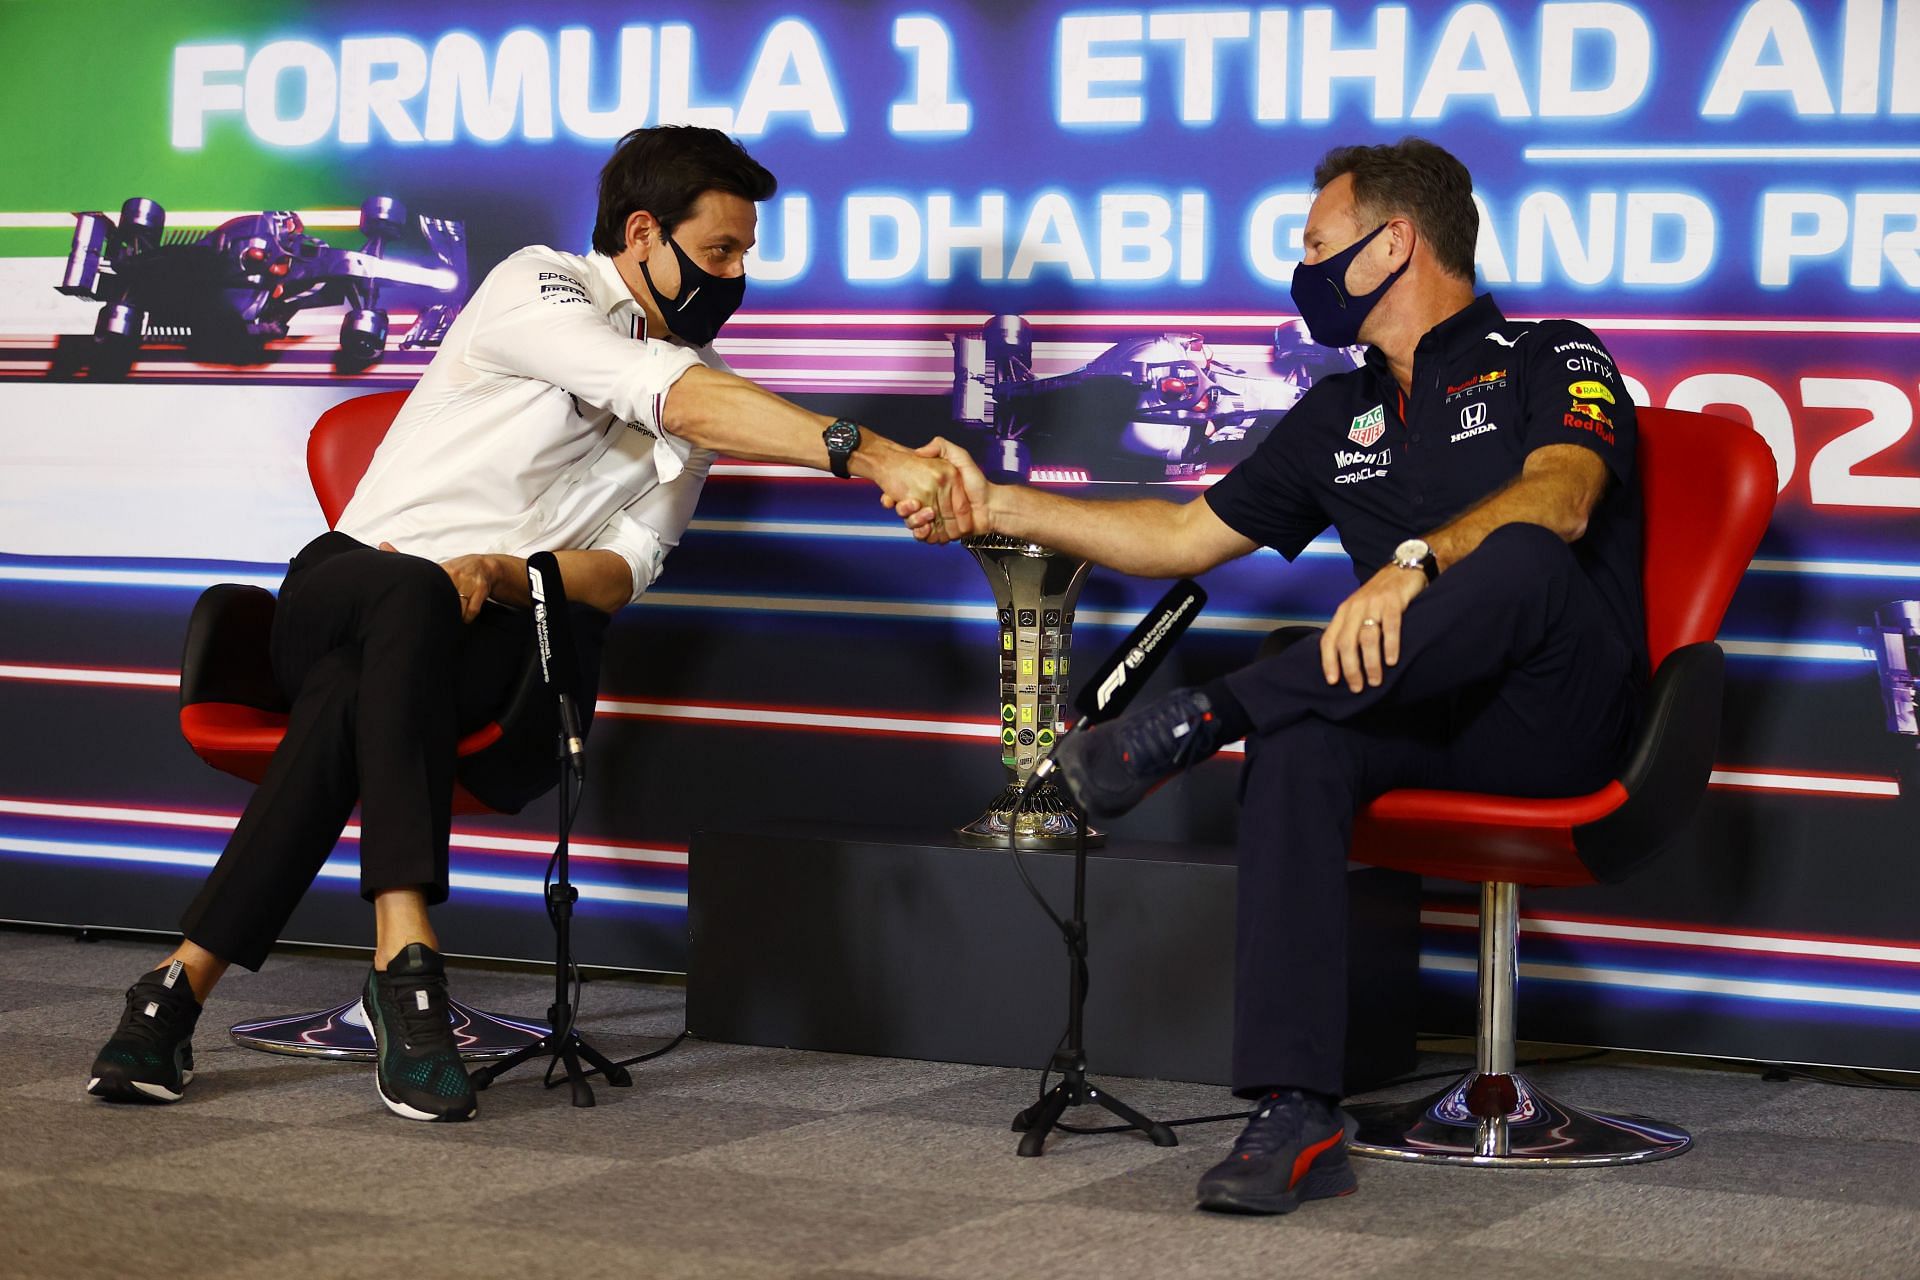 F1 Grand Prix of Abu Dhabi - Practice - Toto Wolff (left) and Christian Horner (right) shake hands